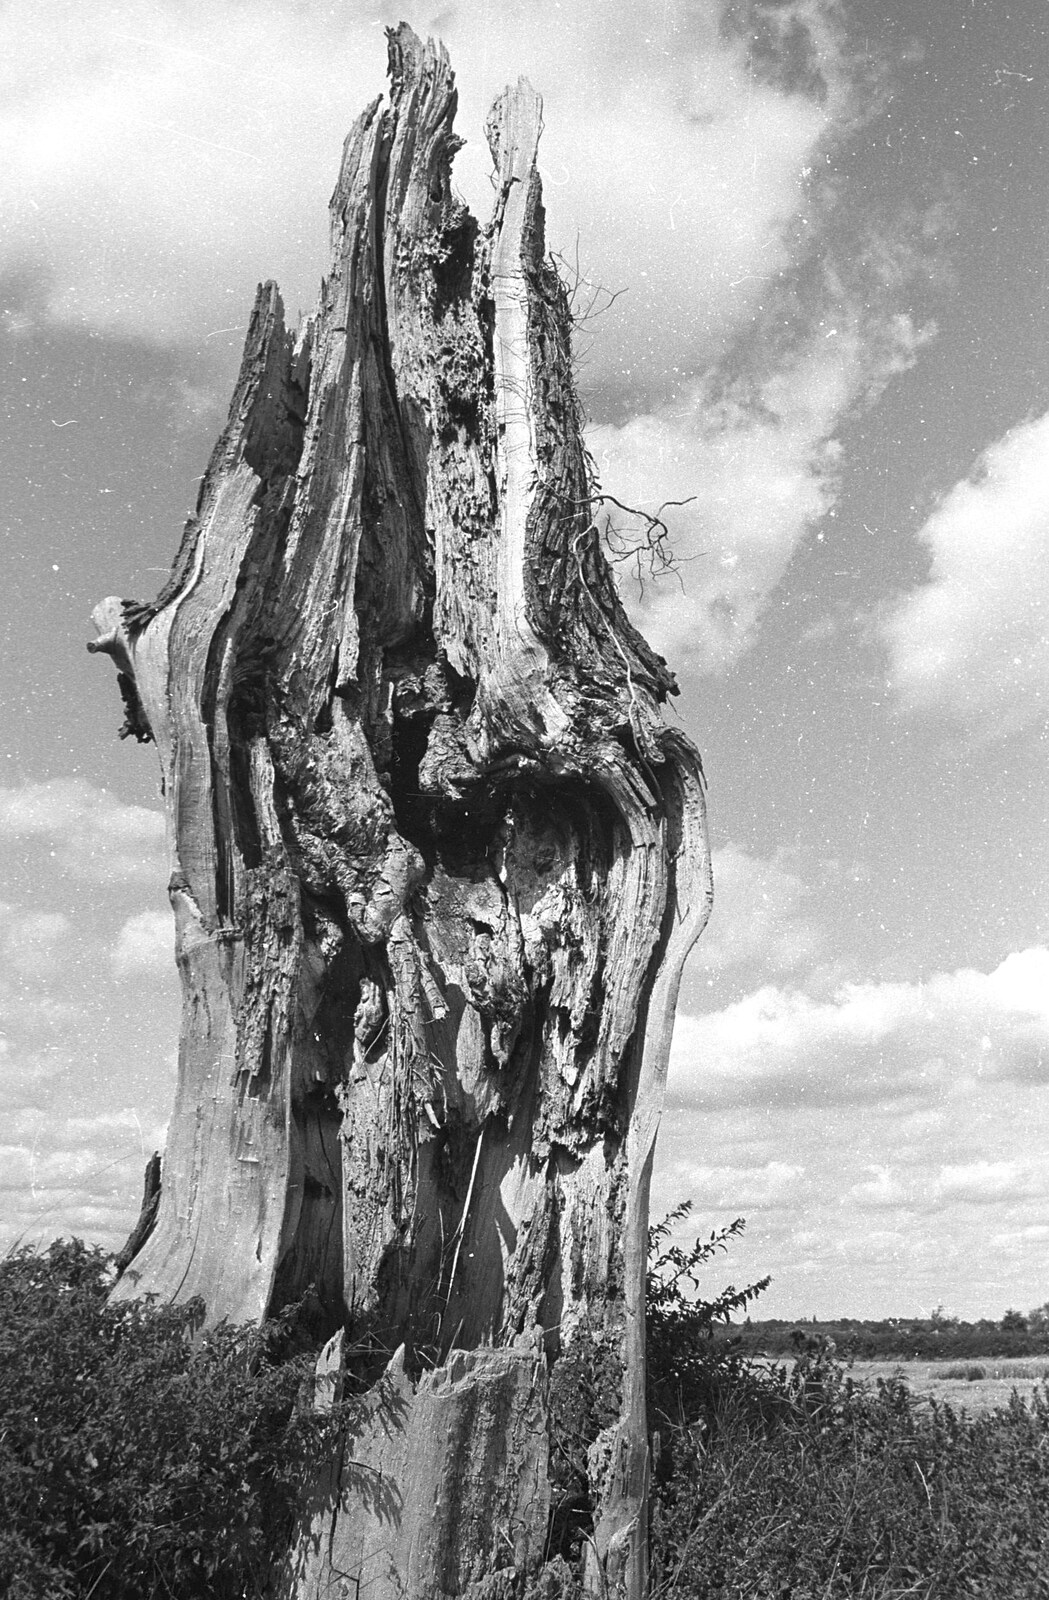 The lightning tree, Stuston from A Black and White Life in Concrete, Stuston, Suffolk - 3rd September 1992